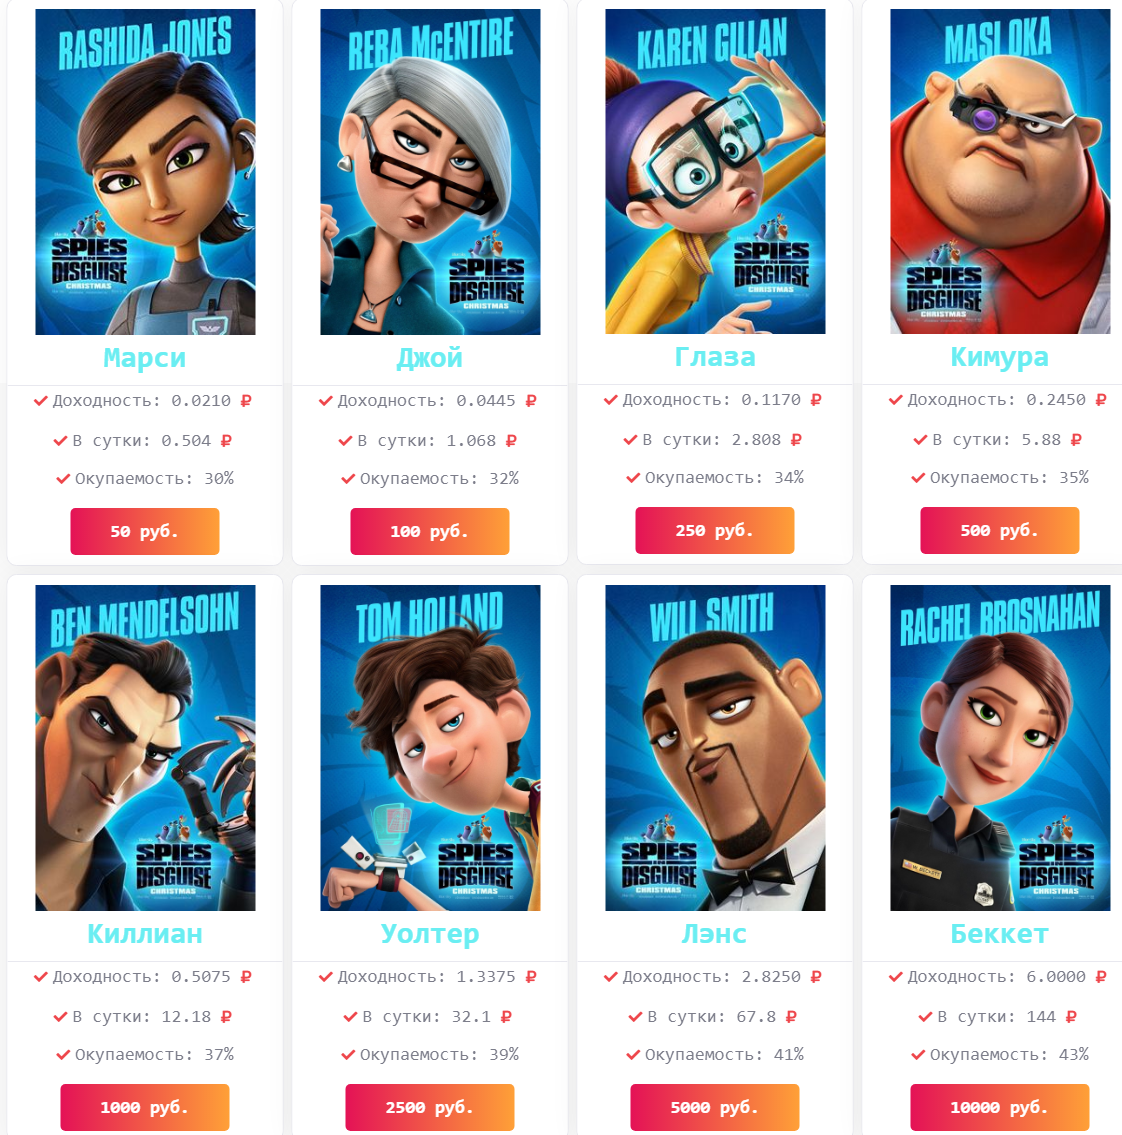 Spies-in-disguise.biz - Spies in Disguise